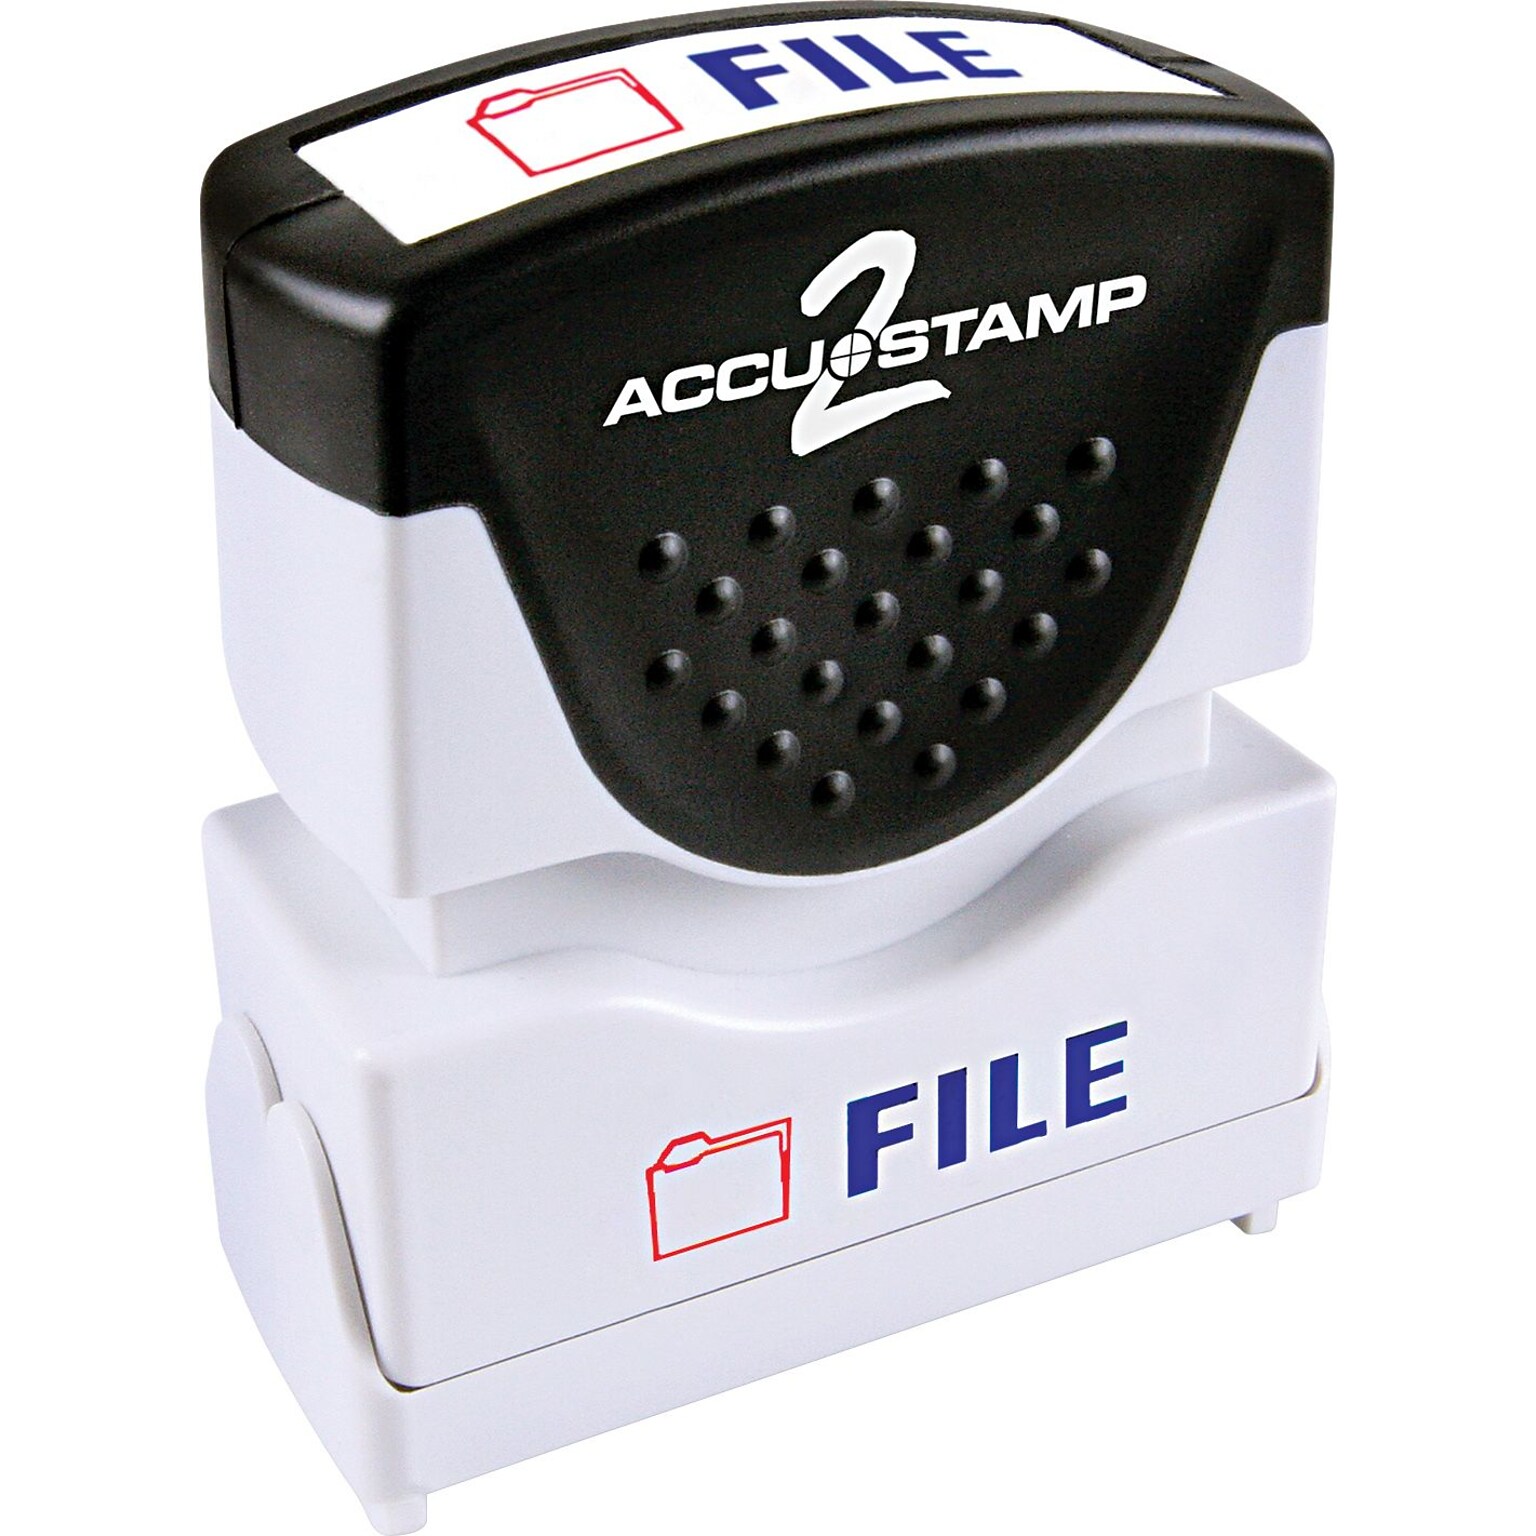 Accu-Stamp2® Two-Color Pre-Inked Shutter Message Stamp, FILE, 1/2 x 1-5/8 Impression, Red/Blue Ink (035534)